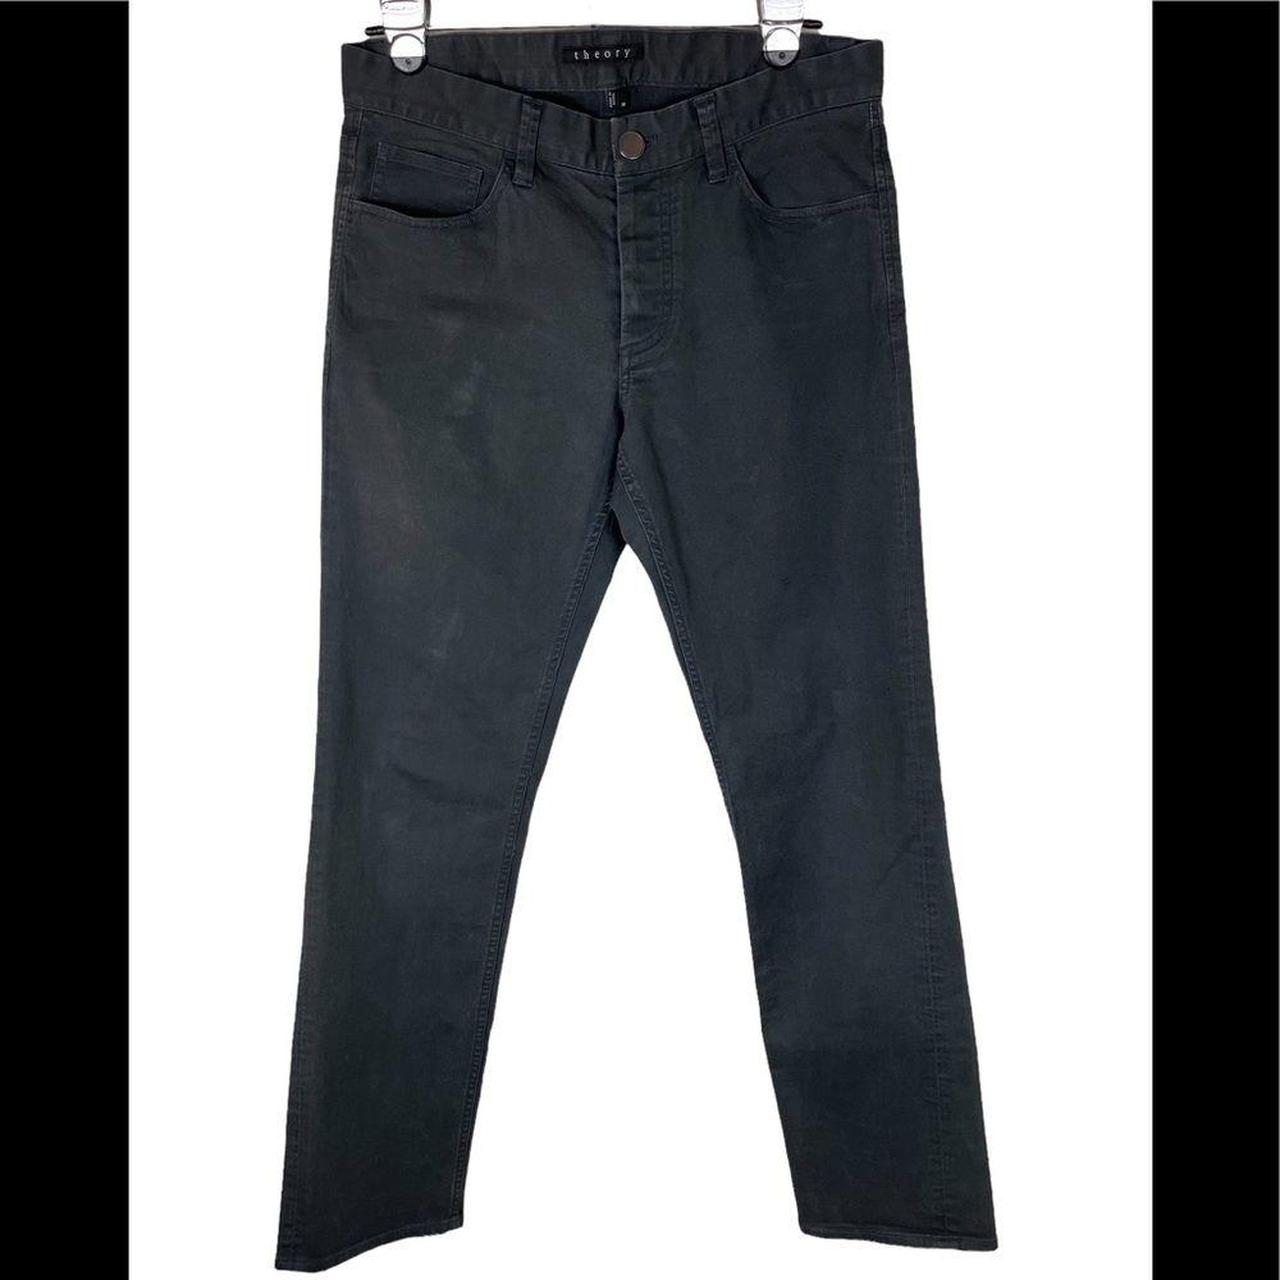 Product Image 2 - These Theory pants are a